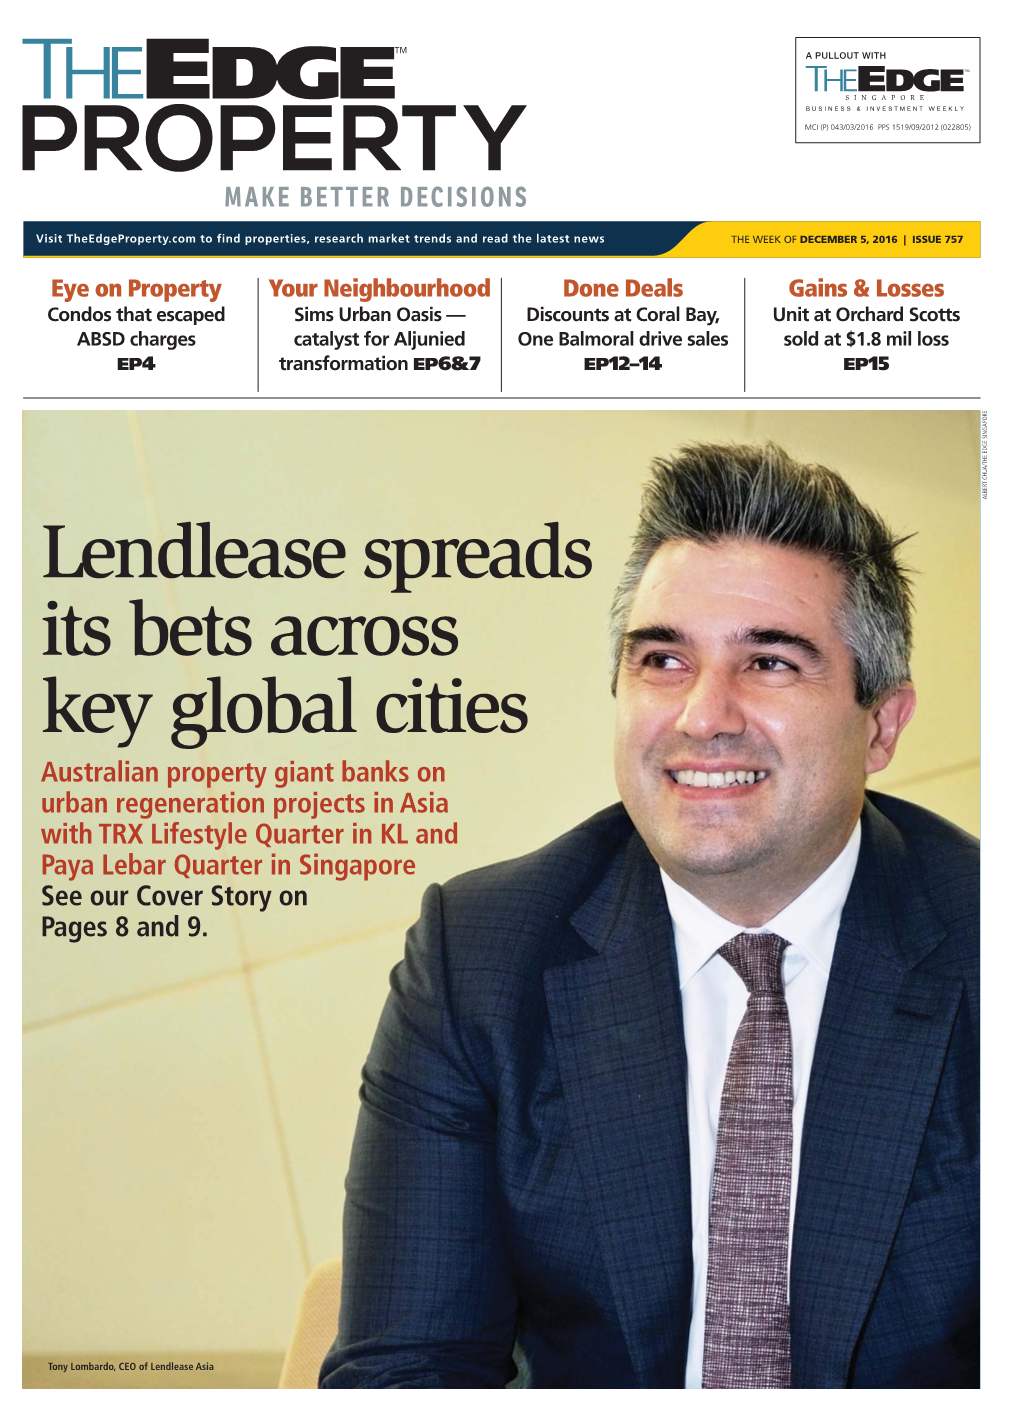 Lendlease Spreads Its Bets Across Key Global Cities